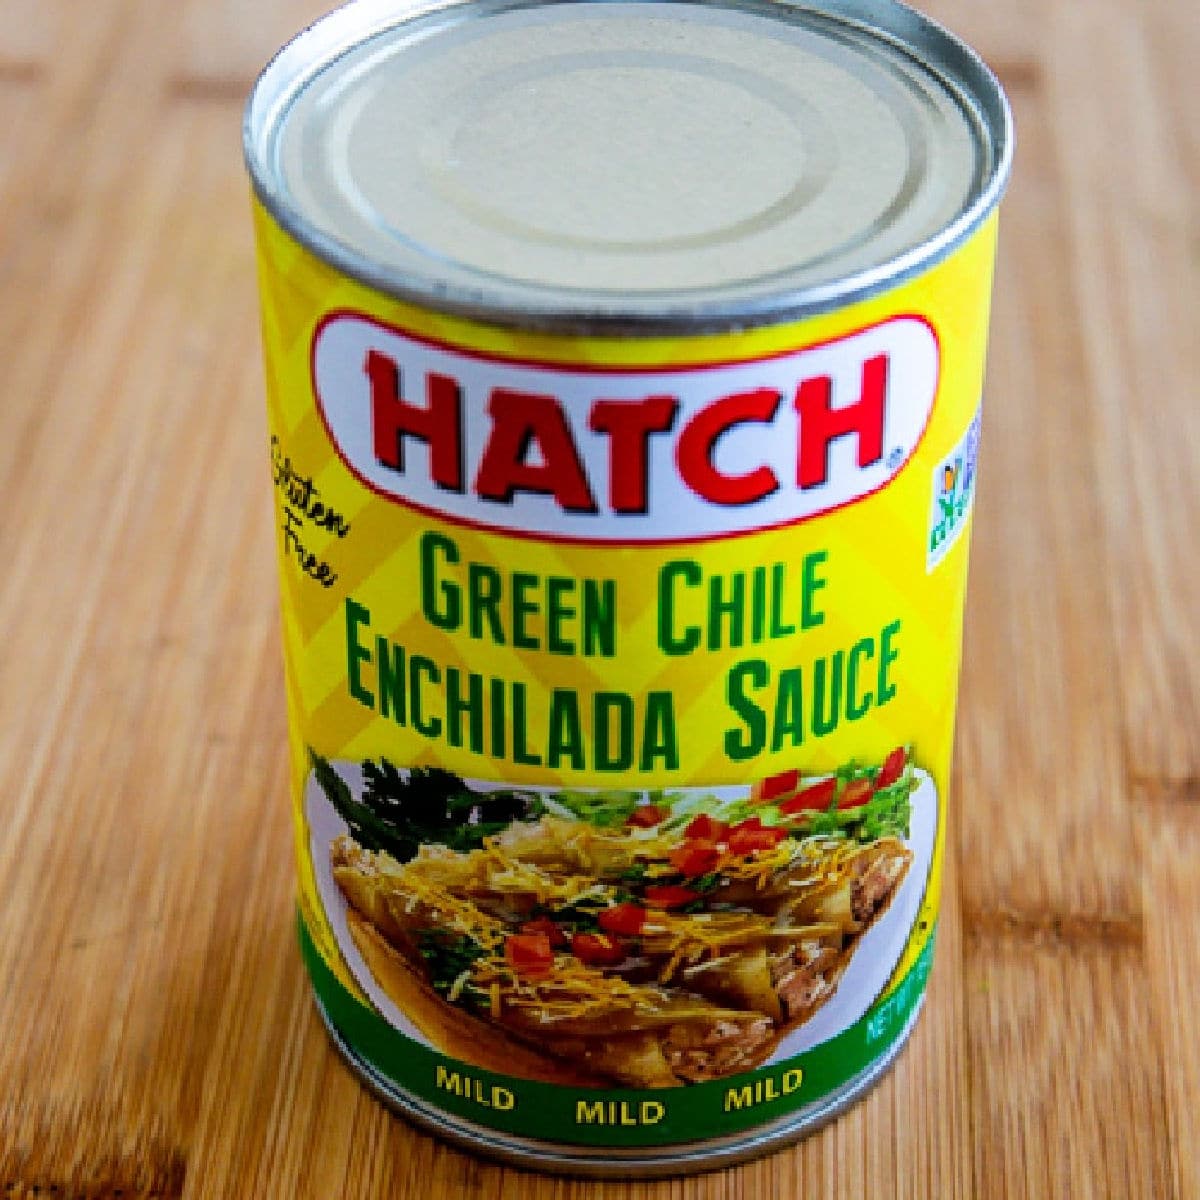 Square image for Hatch Green Chile Enchilada Sauce.